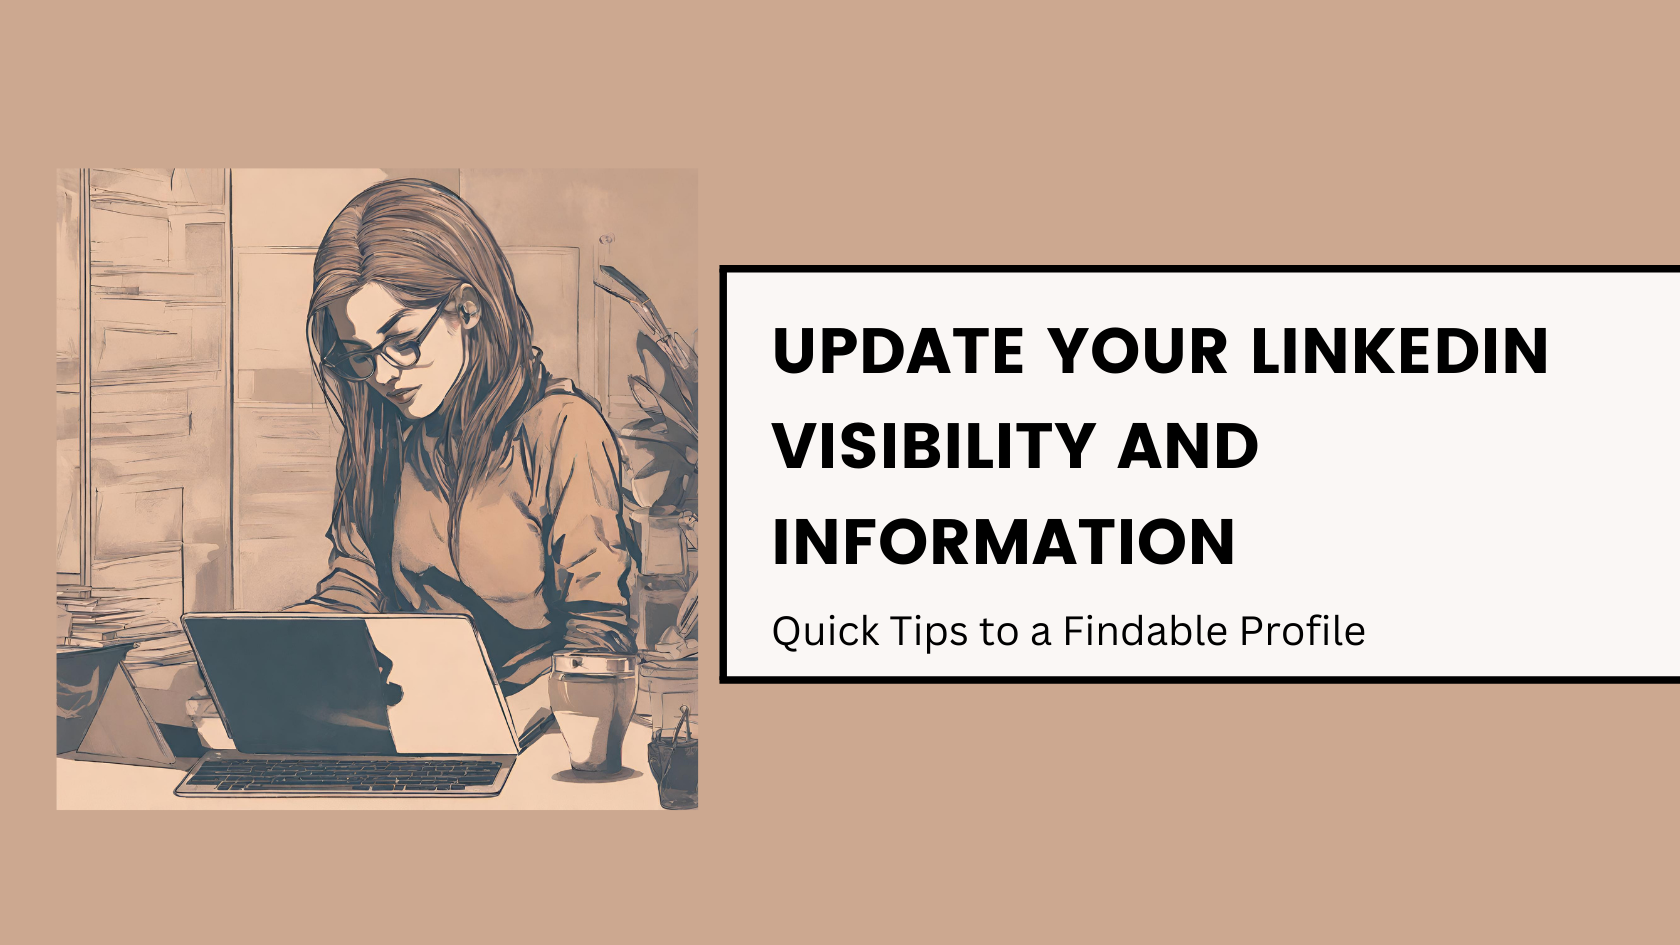 Featured image for “Update Your LinkedIn Visibility and Information: Quick tips to a Findable Profile”